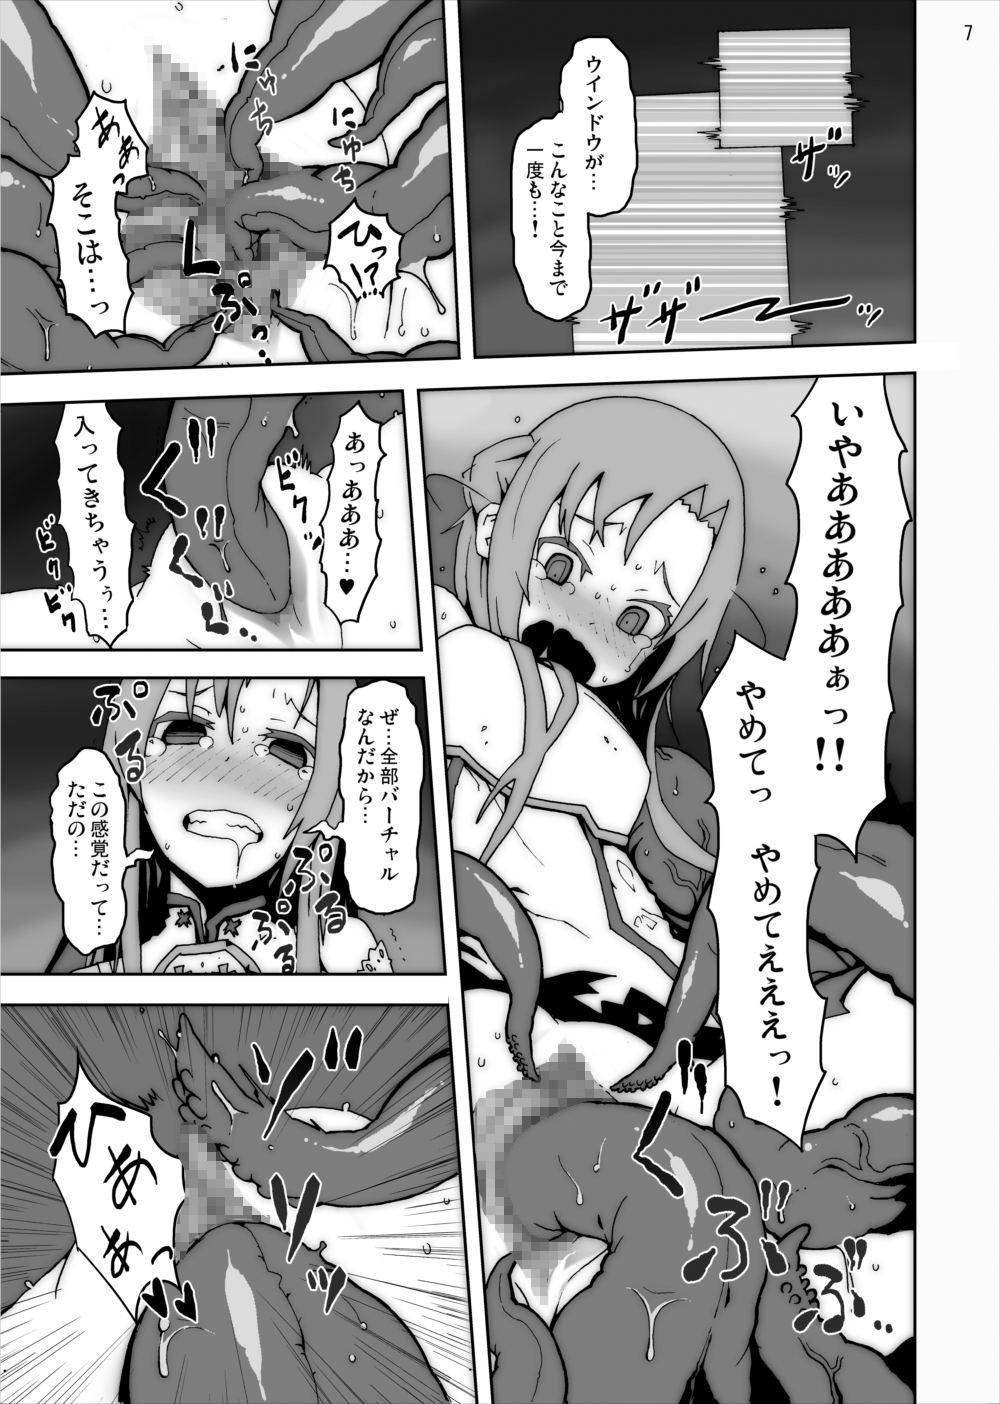 Amigos Asuna in Tentacle Party Rape Online - Sword art online Hardcore Porn Free - Page 6